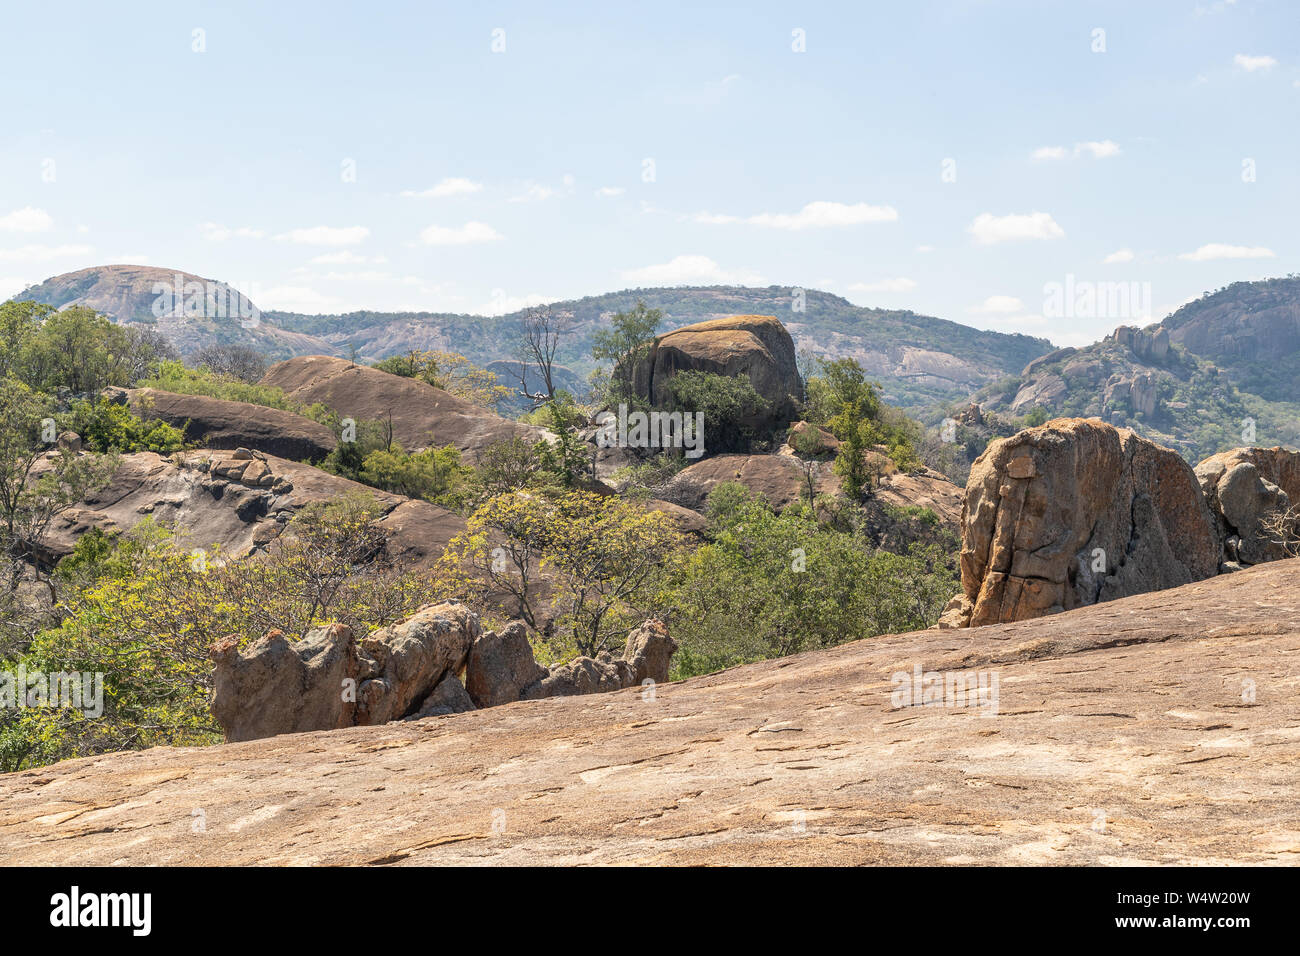 A view of a collection of boulders from the top of another rock formation. Stock Photo